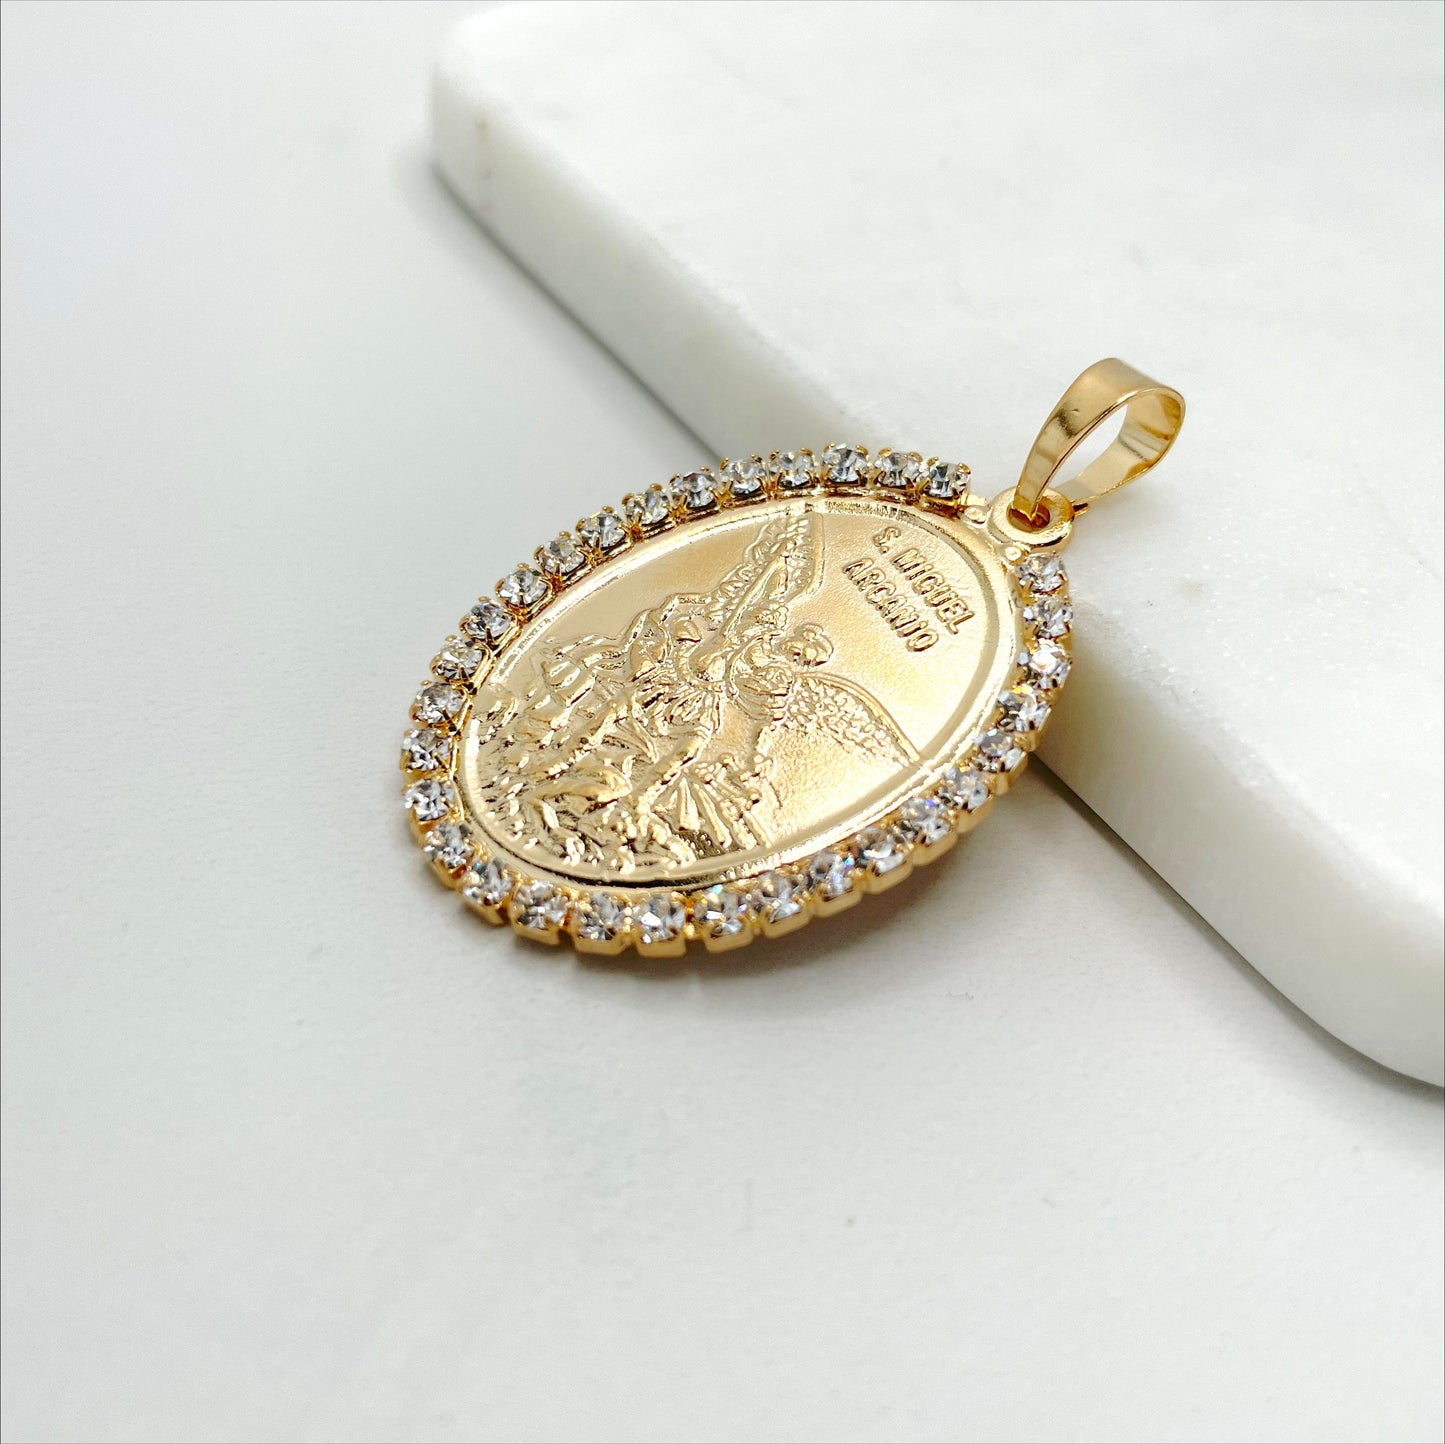 18k Gold Filled Cubic Zirconia Oval Medal  San Miguel Arcangel Pendant Charms, Religious Jewelry, Wholesale Jewelry Making Supplies